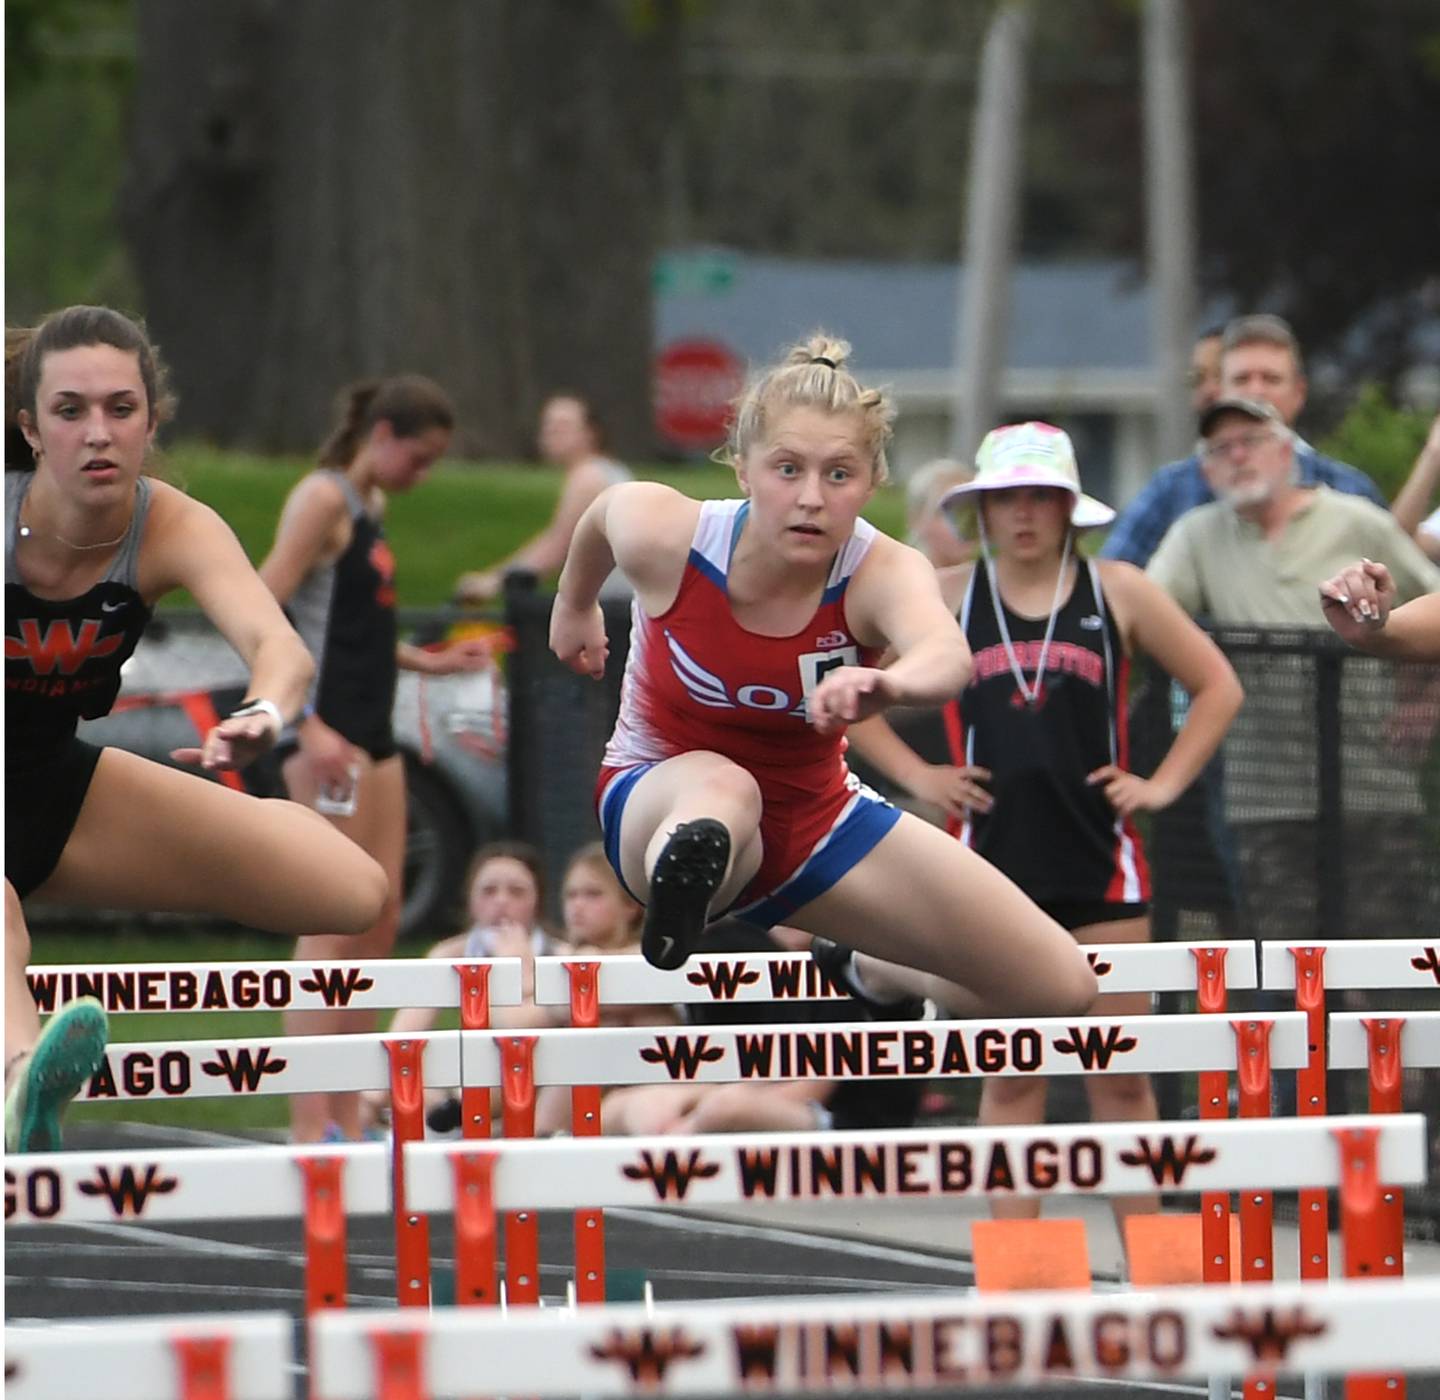 Oregon's Sophie Stender races in the 100 hurdles at the 1A Winnebago Sectional on Friday, May 13. She qualified for the state meet.